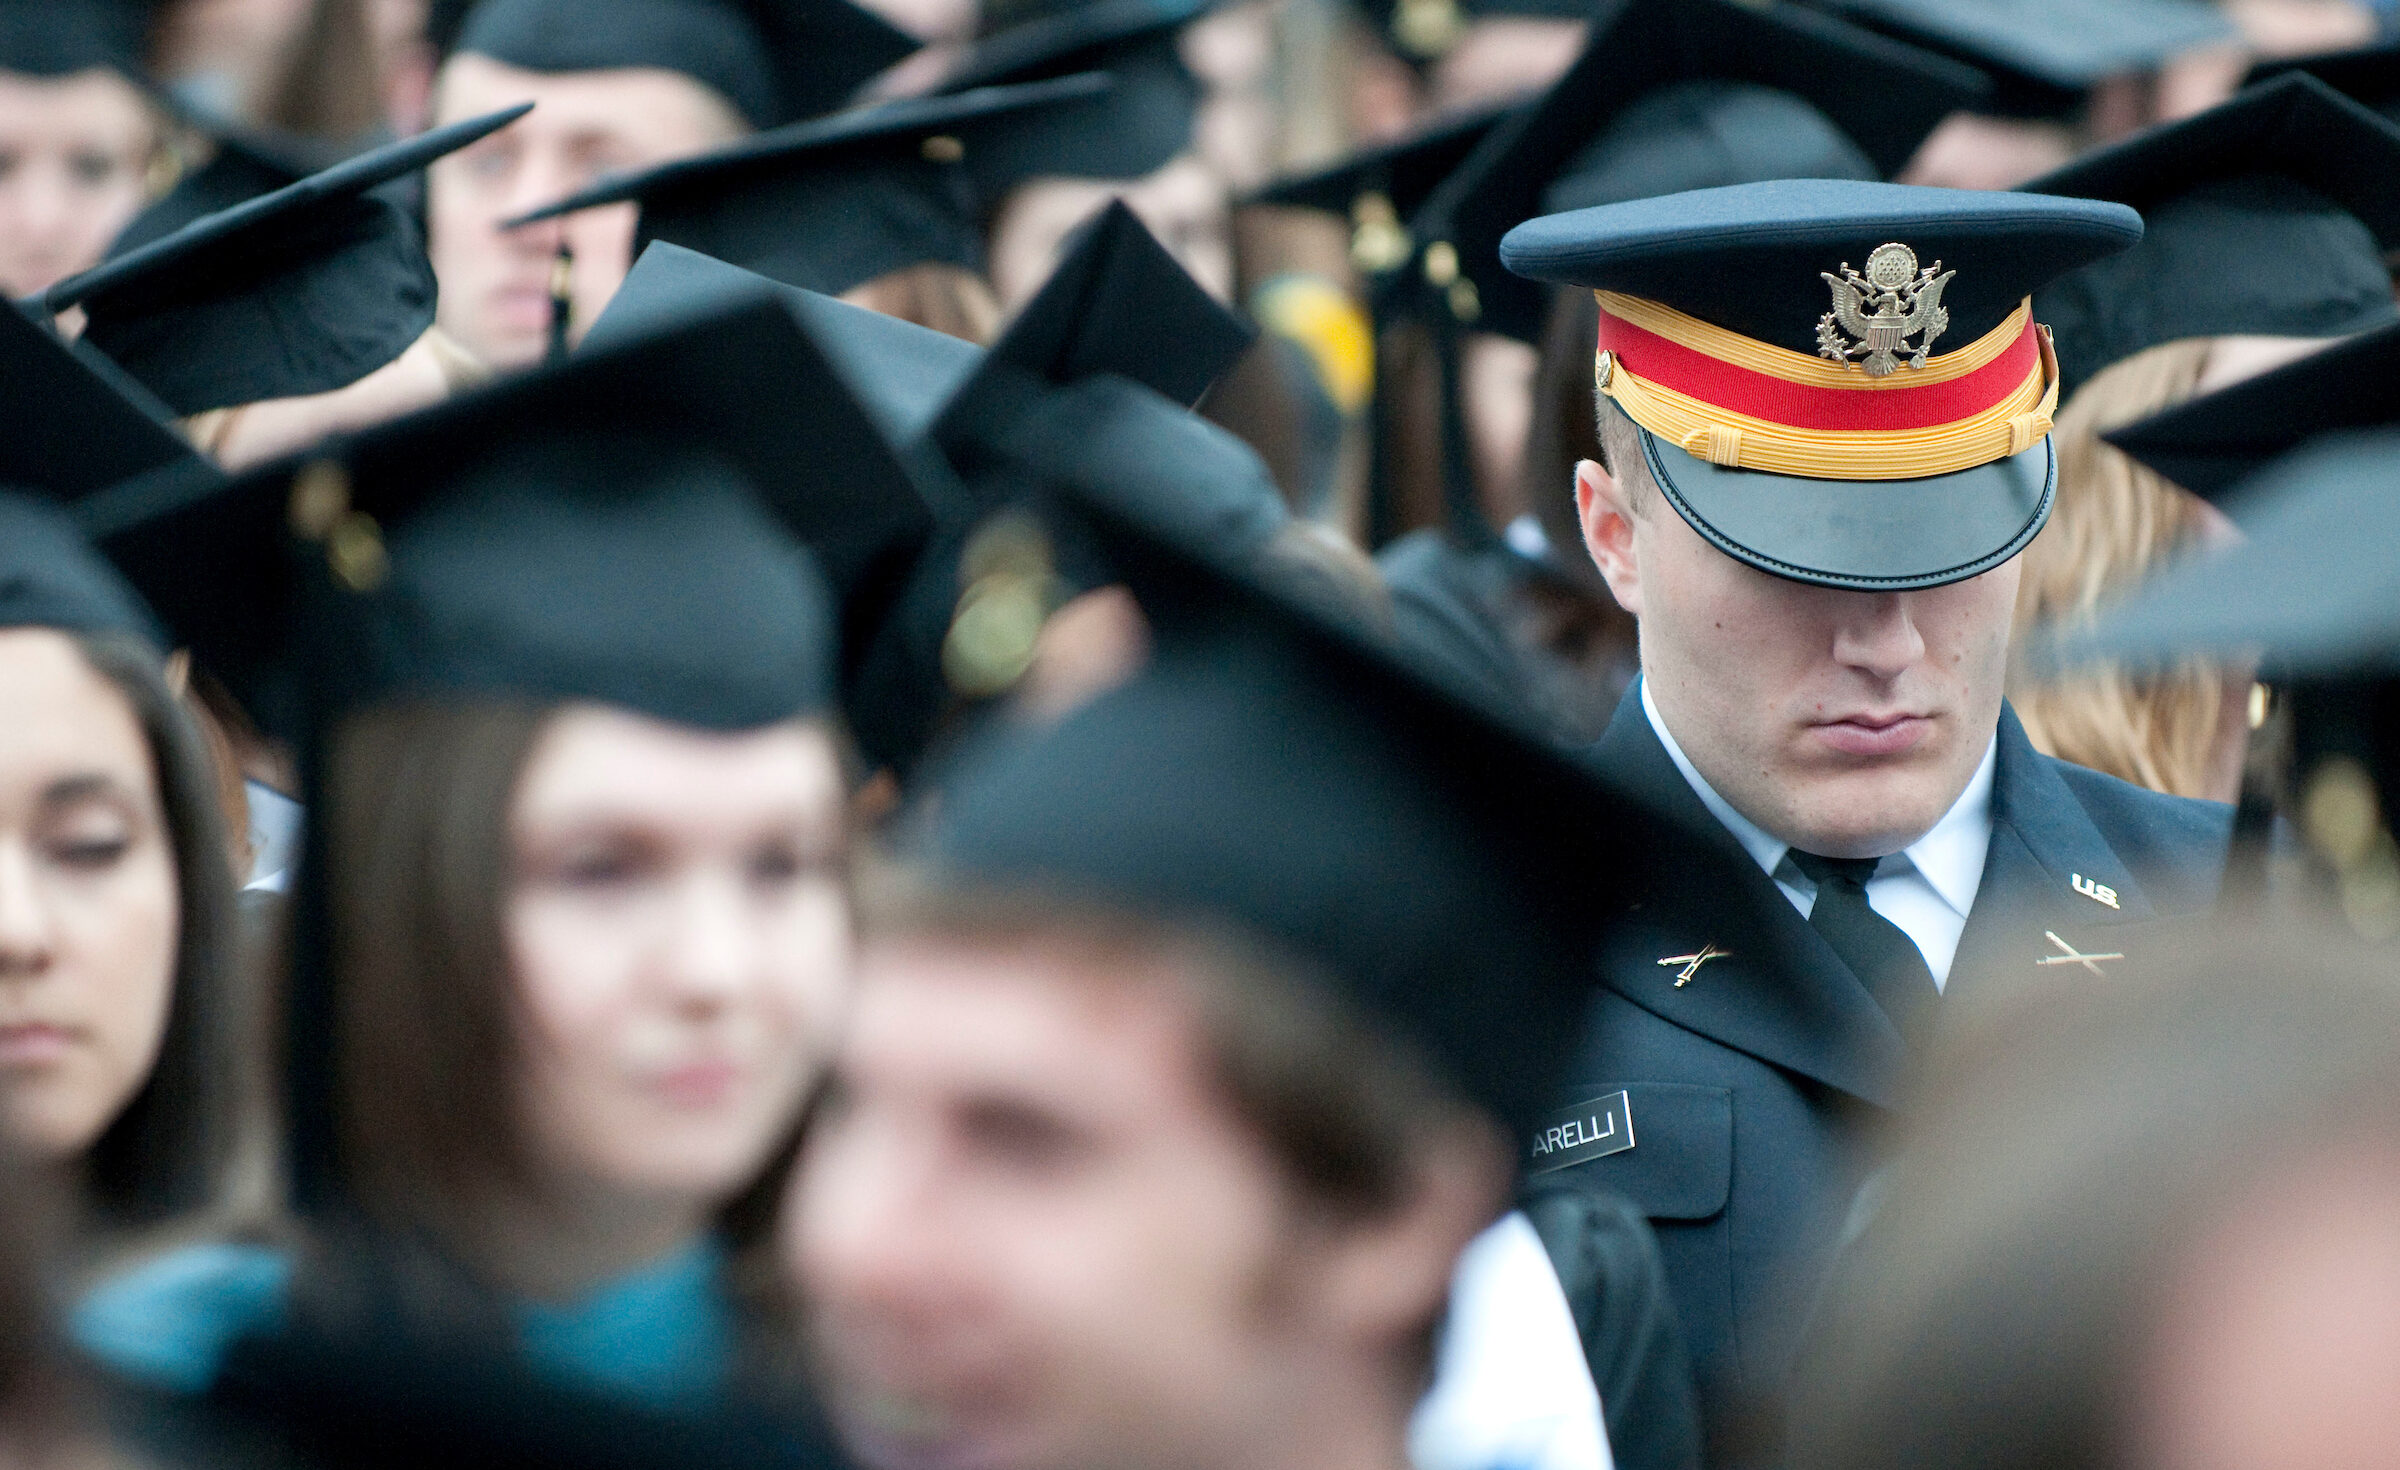 Military member stands in crowd at commencement ceremony